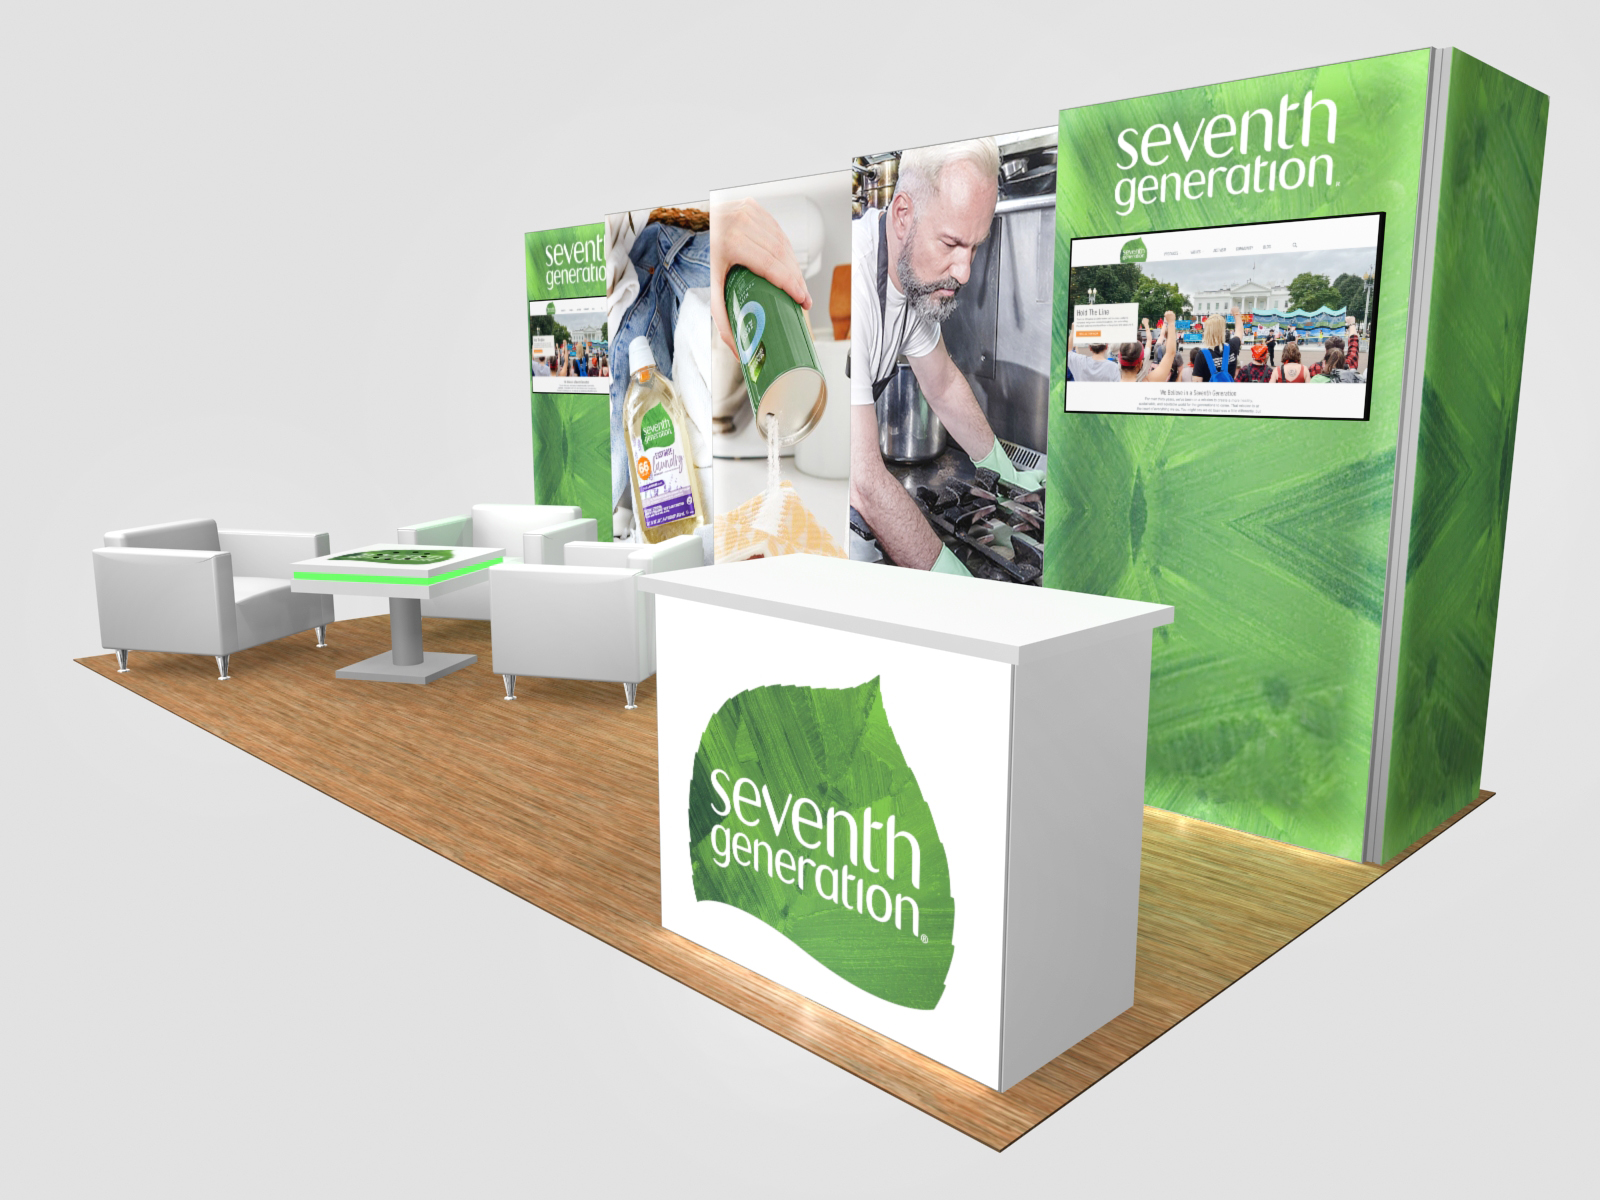 exhibit rental for cleaning company